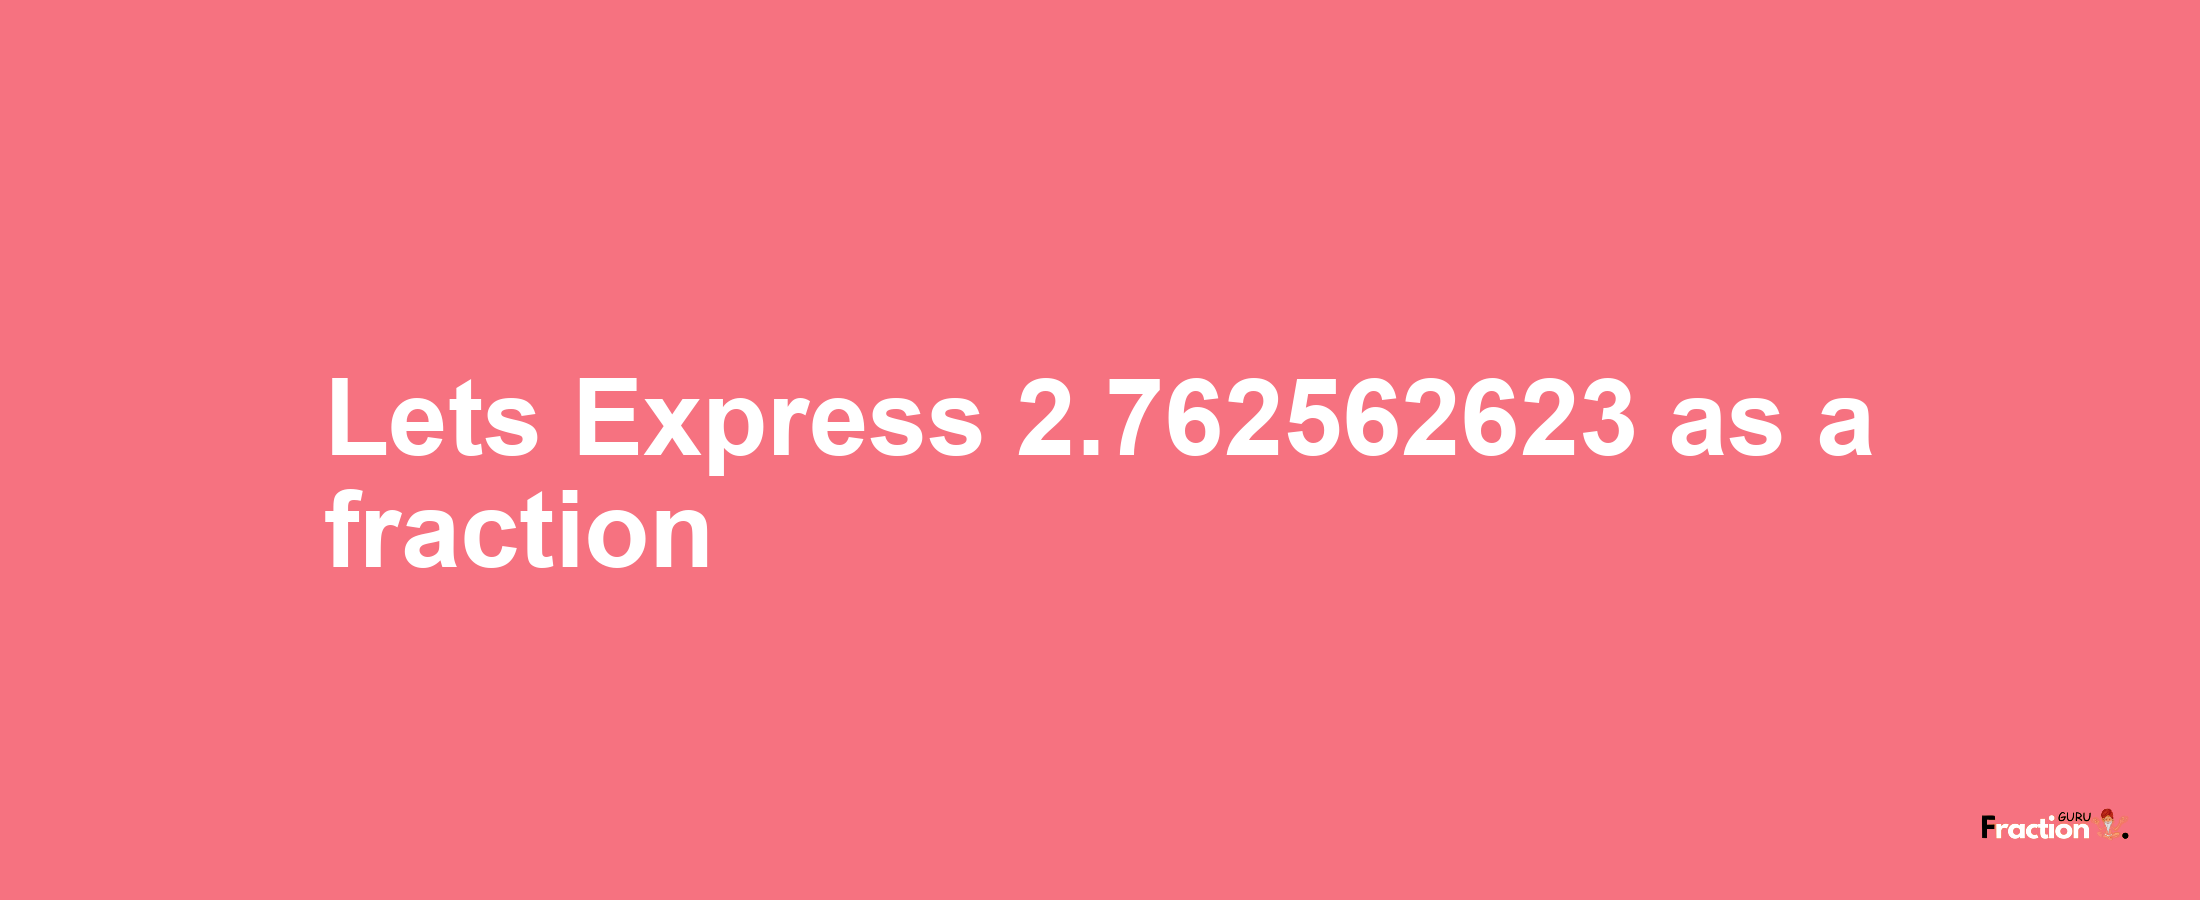 Lets Express 2.762562623 as afraction